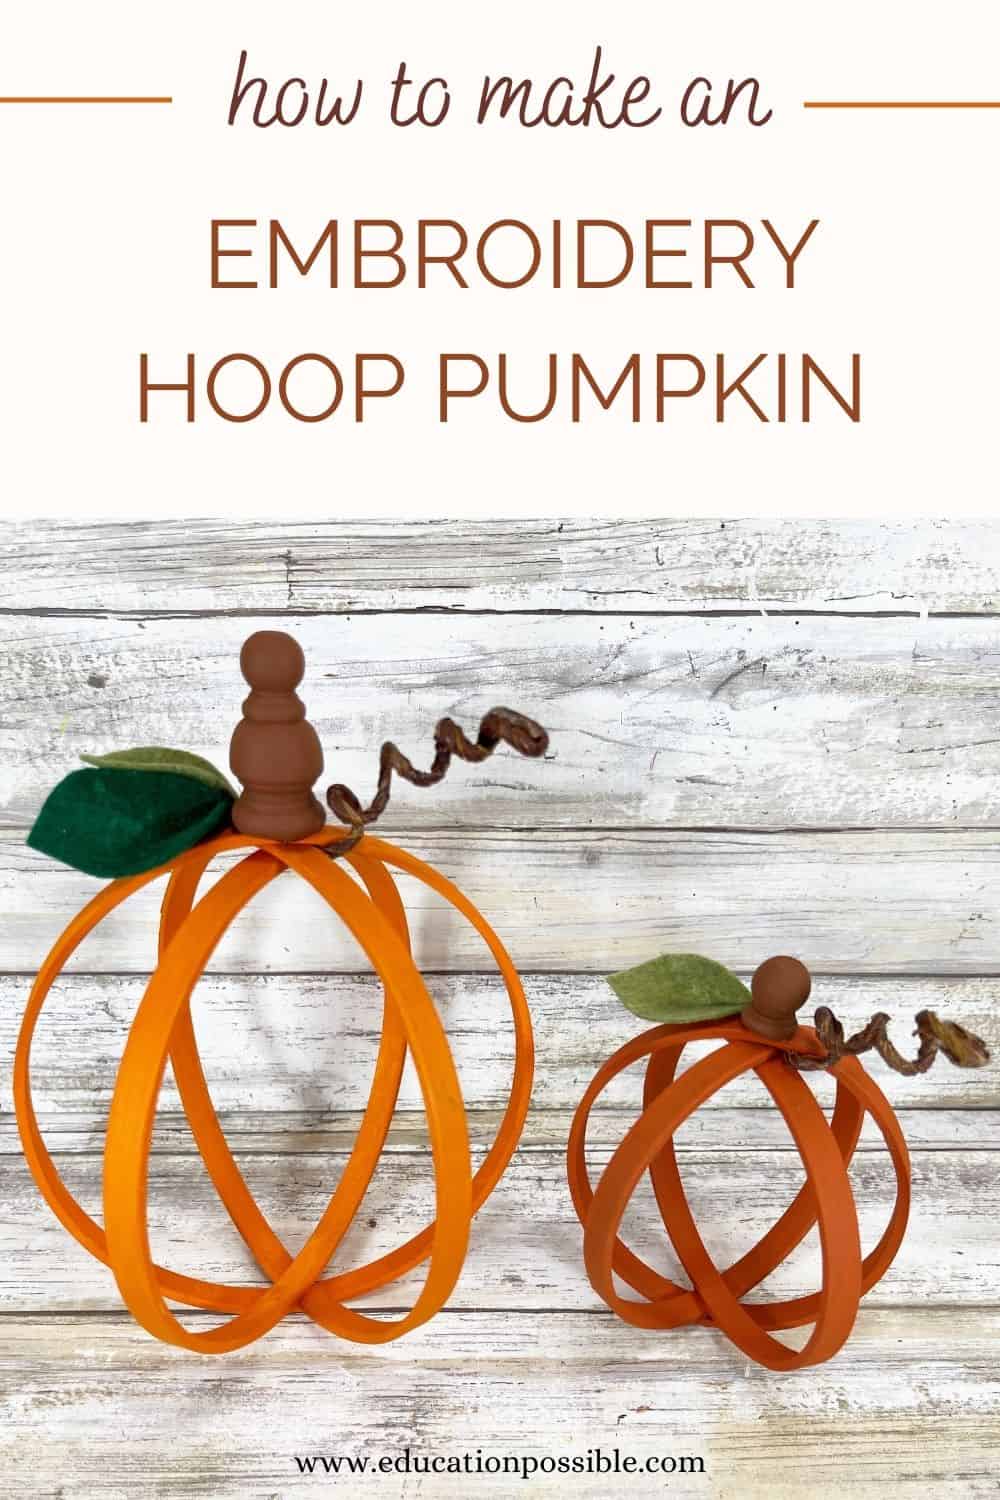 Two pumpkin decorations made out of embroidery hoops